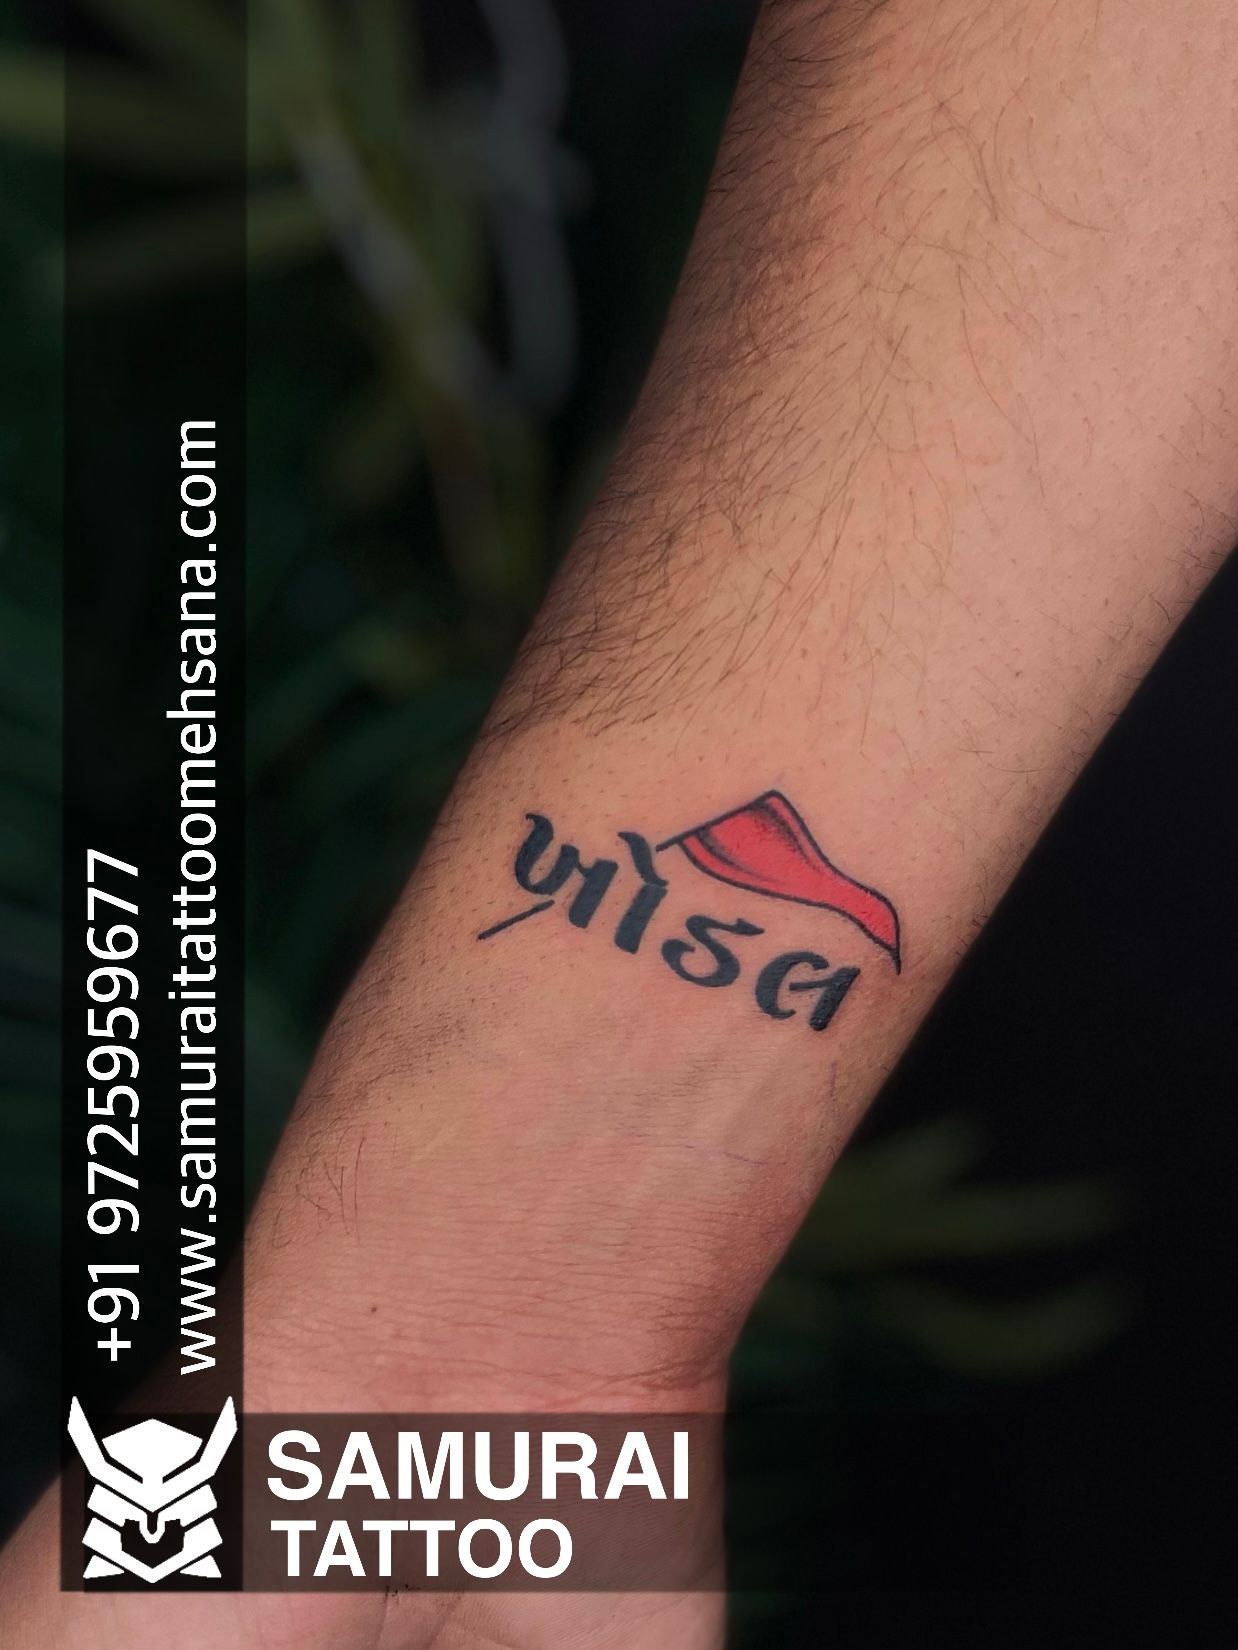 i khodal maa tattoo design on hand  Professional Tattoo Work Safe   Hygienic Temporary Tattoos Available Book For Appointment   Mo91 9054807121  By Sem Tattoo studio  Facebook